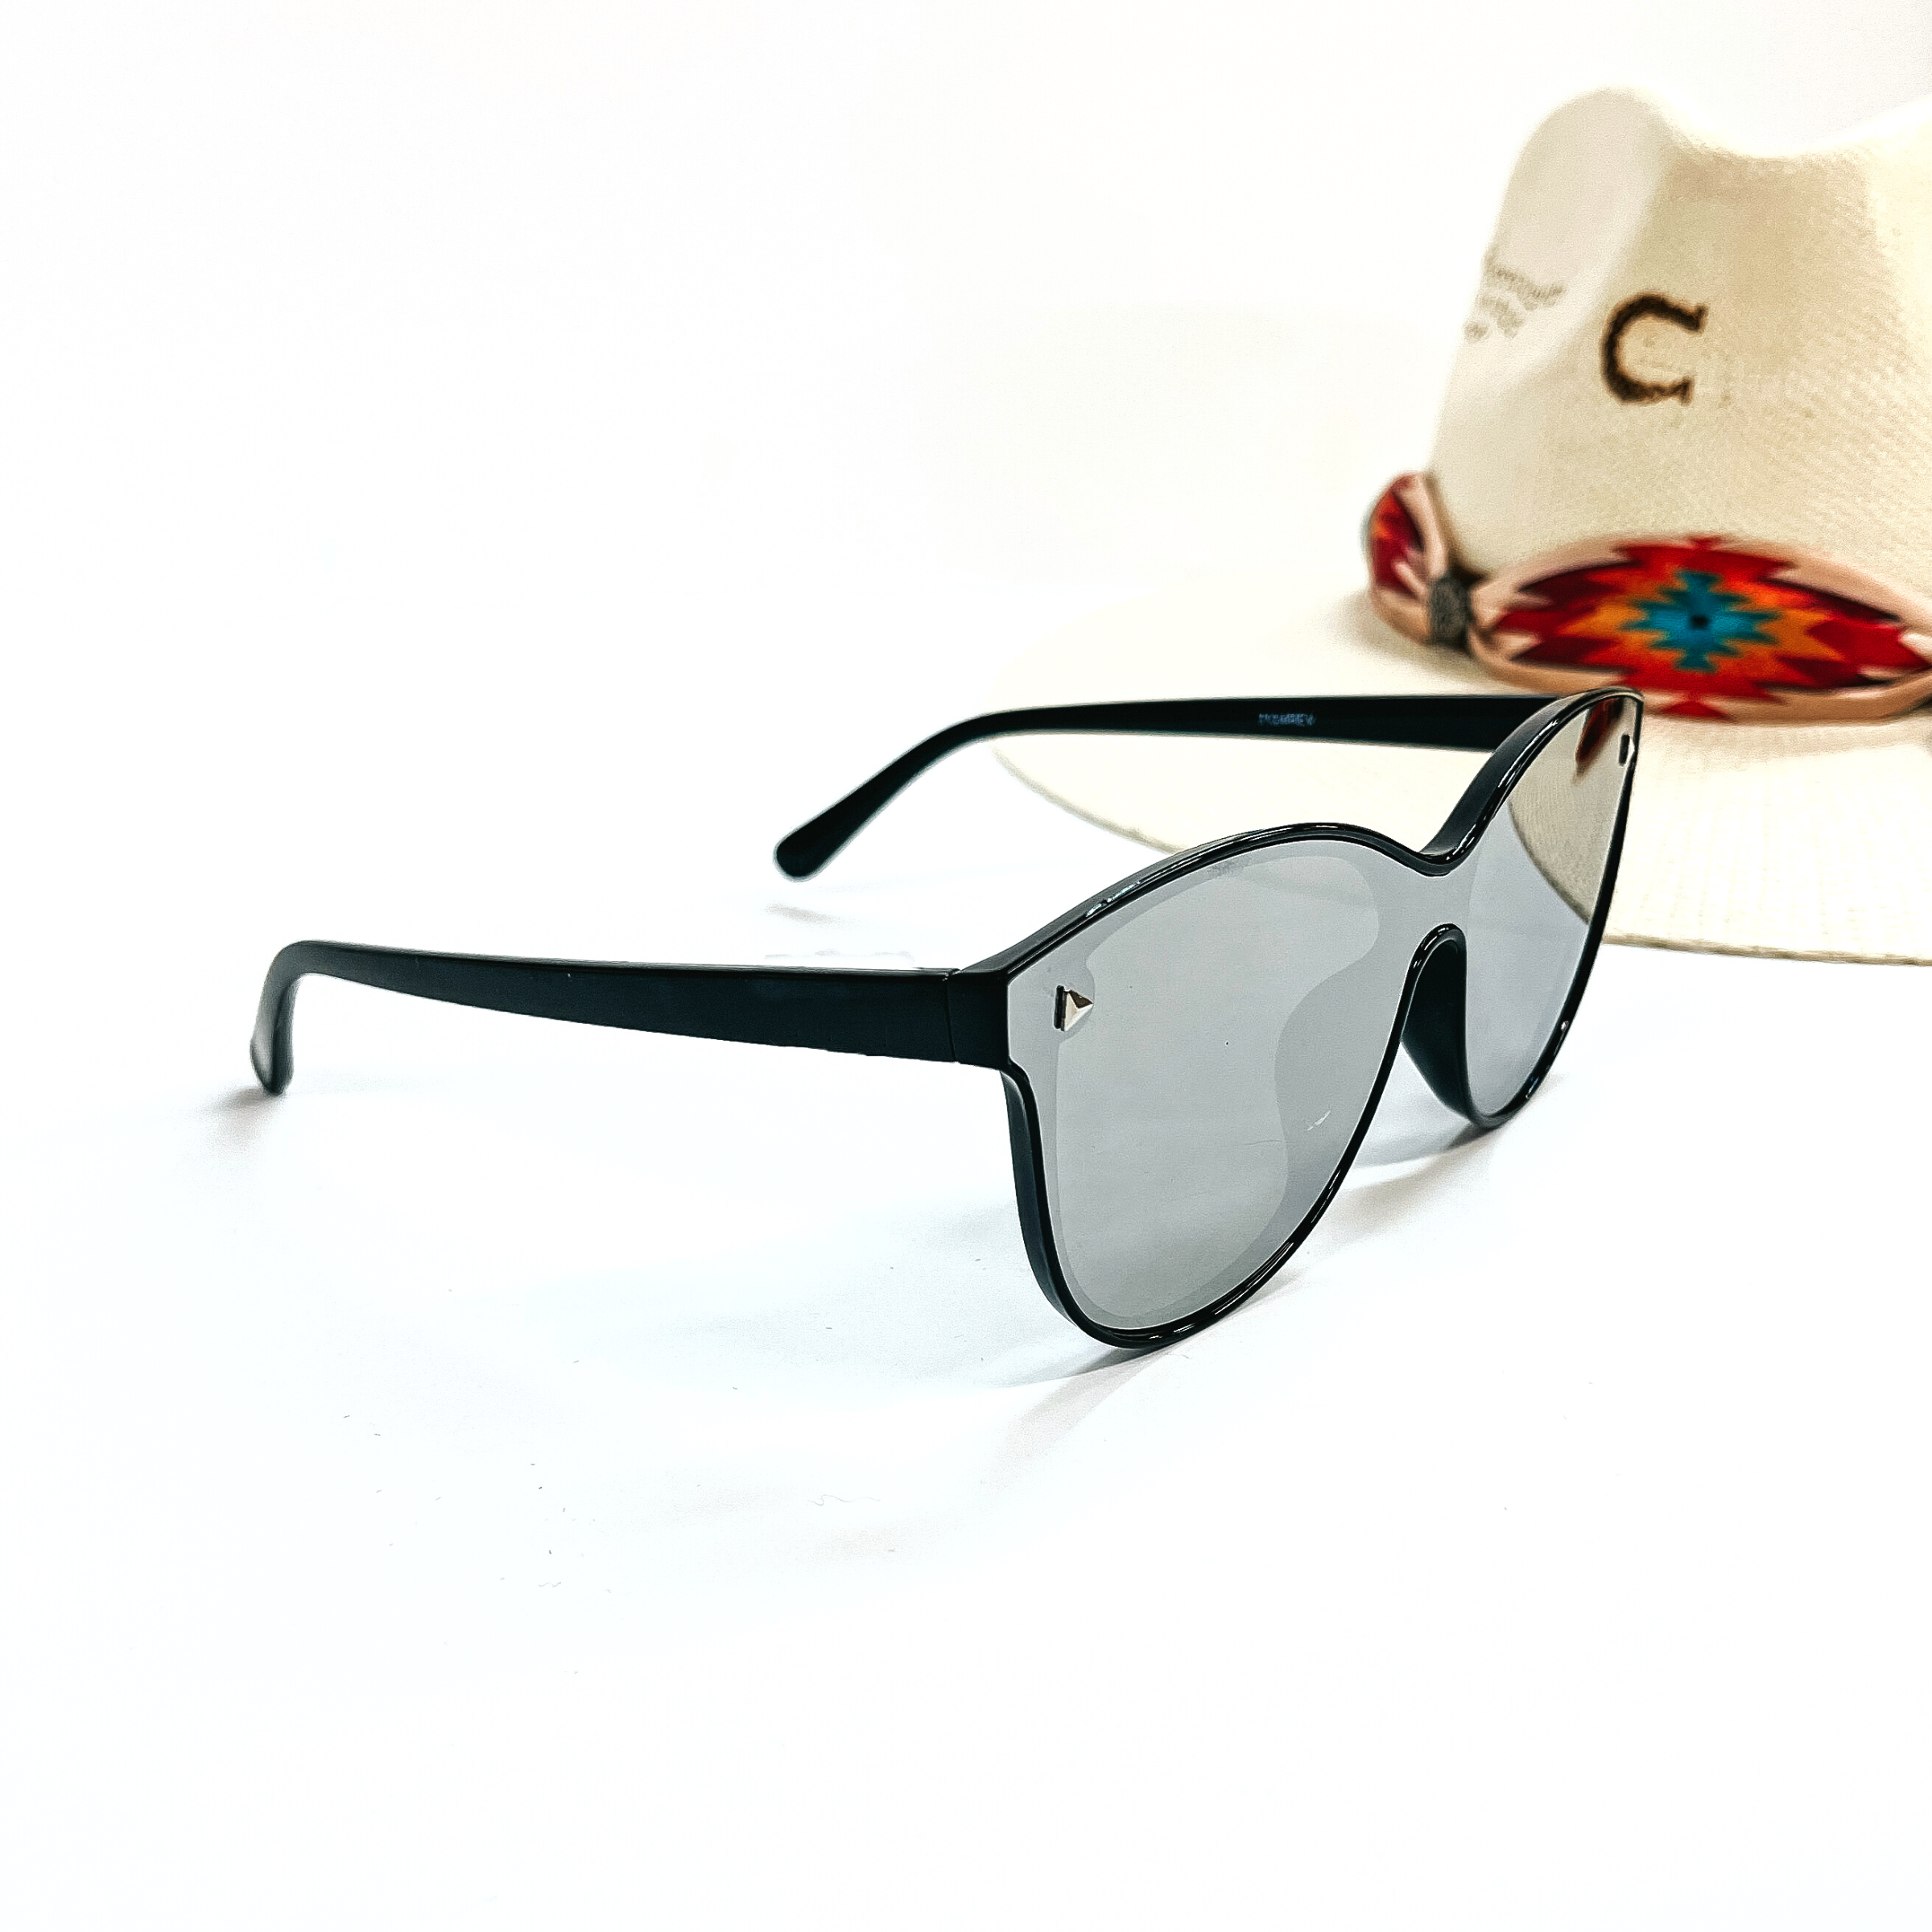 This is a pair of black matte frame sunglasses with a silver  mirrored lense and silver tone  detailing. This pair of sunglasses are taken on a white background and an ivory straw hat  with a colorful aztec print hat band in the back as  decor.